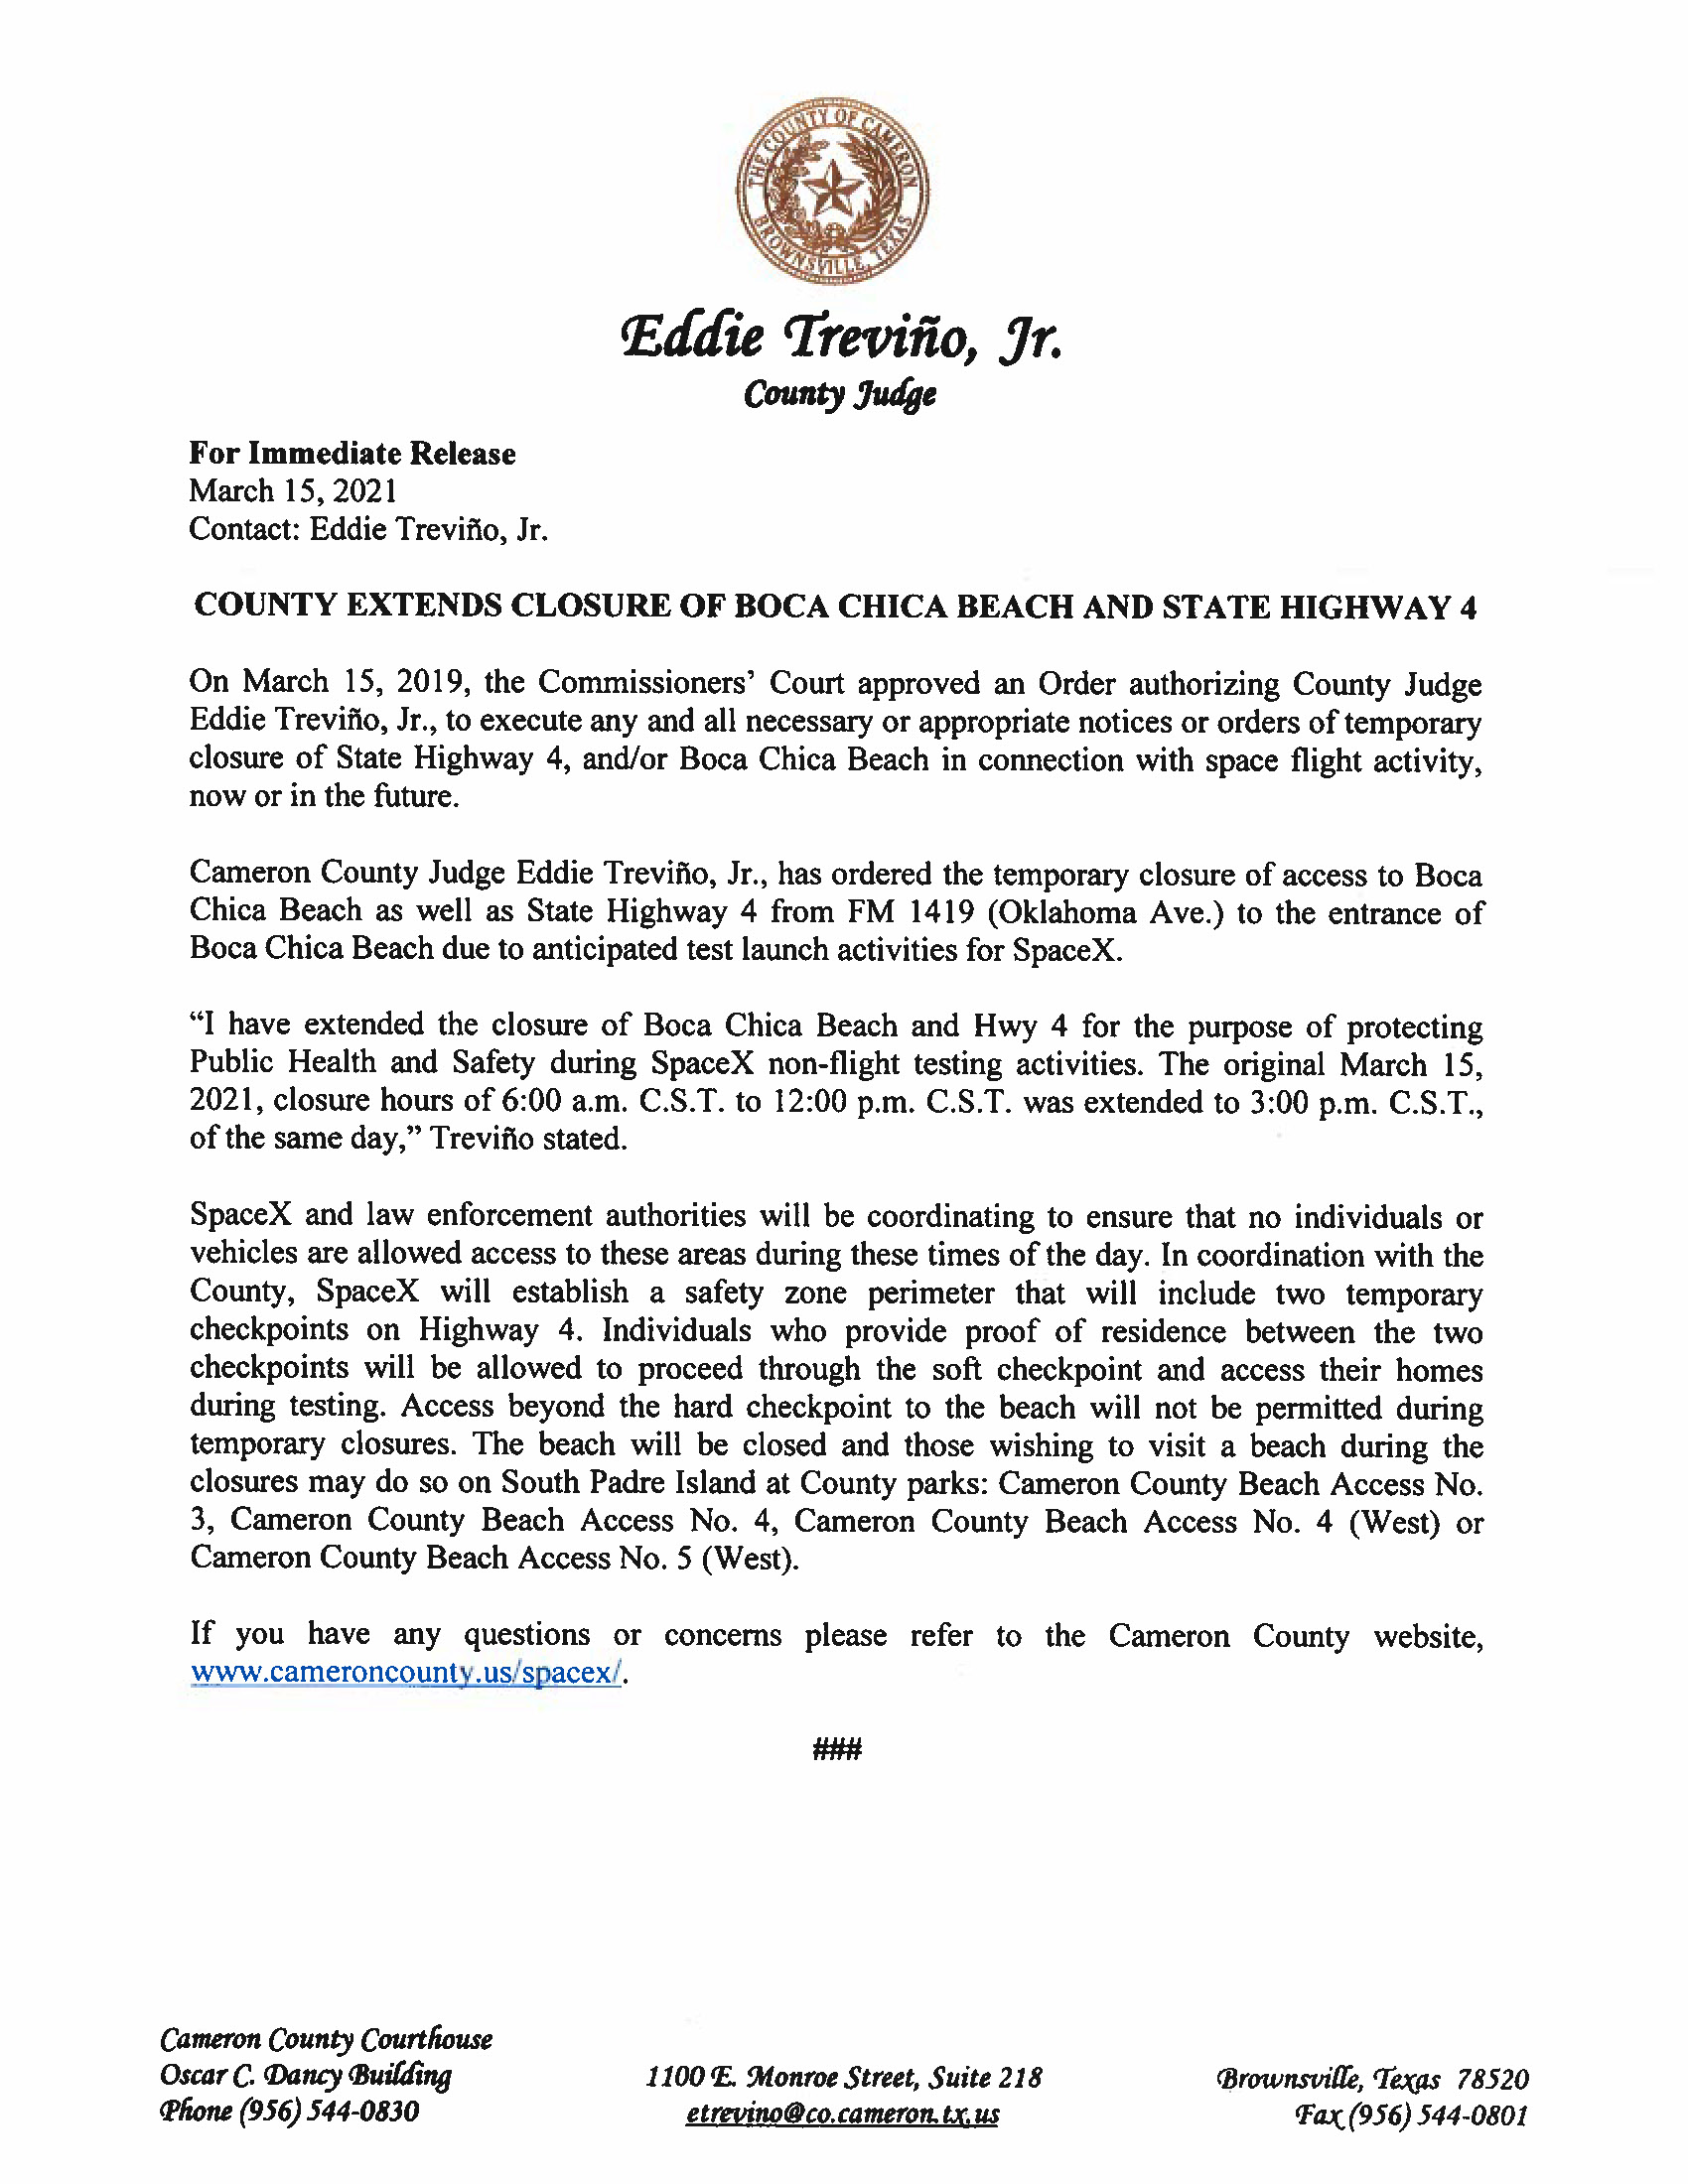 Press Release In English And Spanish.03.15.21 Time Extended To 3 P.m. Page 1